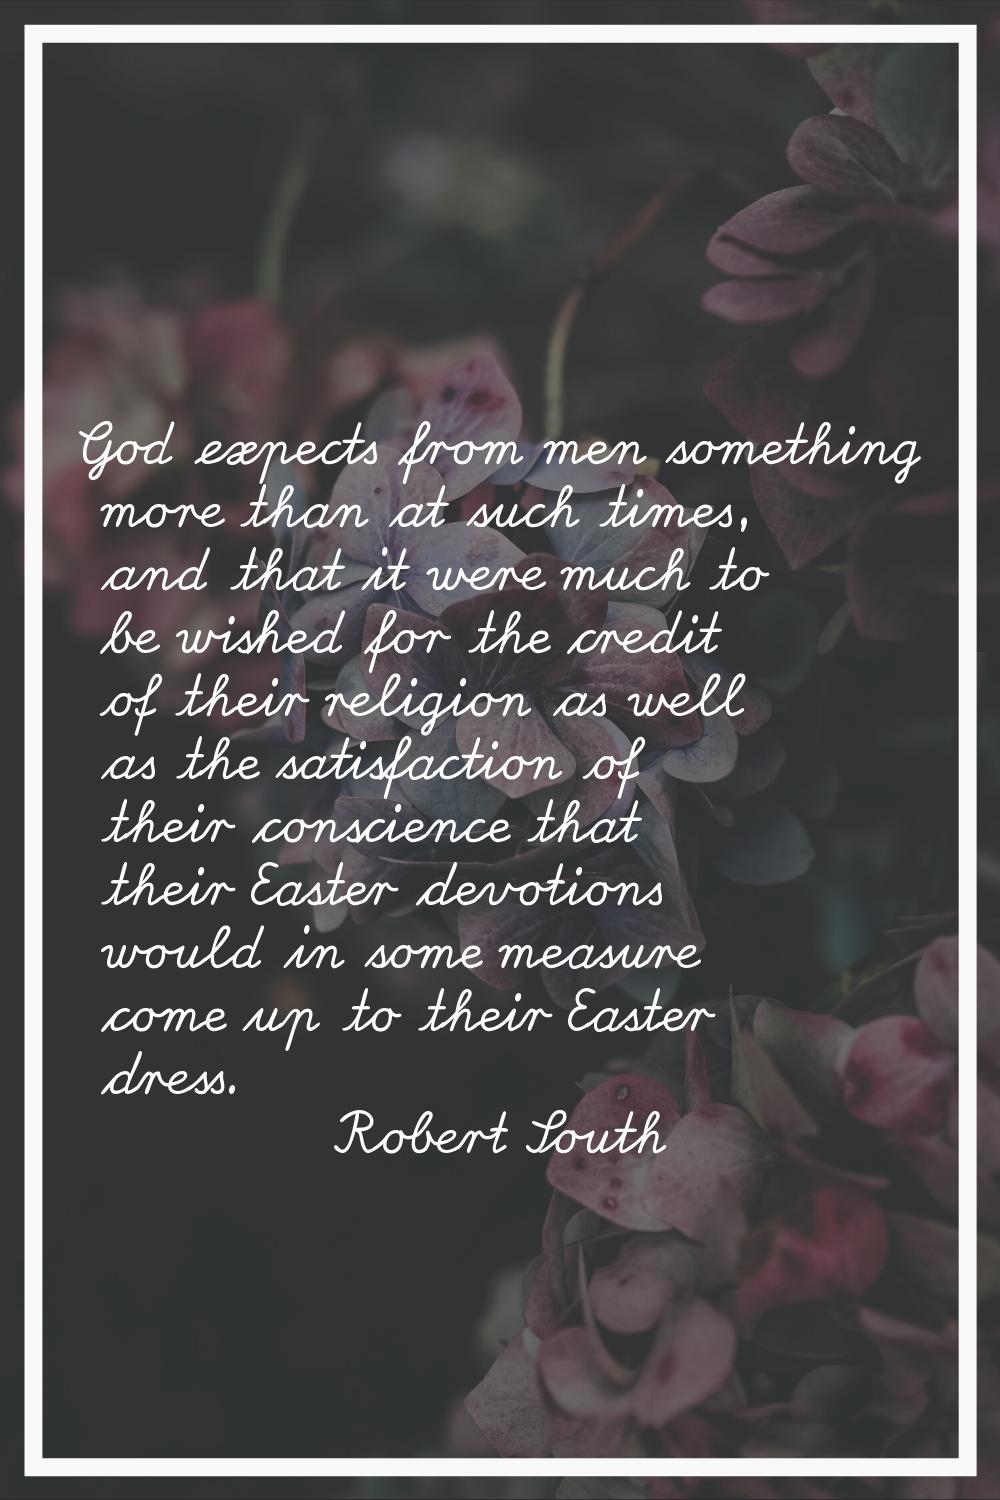 God expects from men something more than at such times, and that it were much to be wished for the 